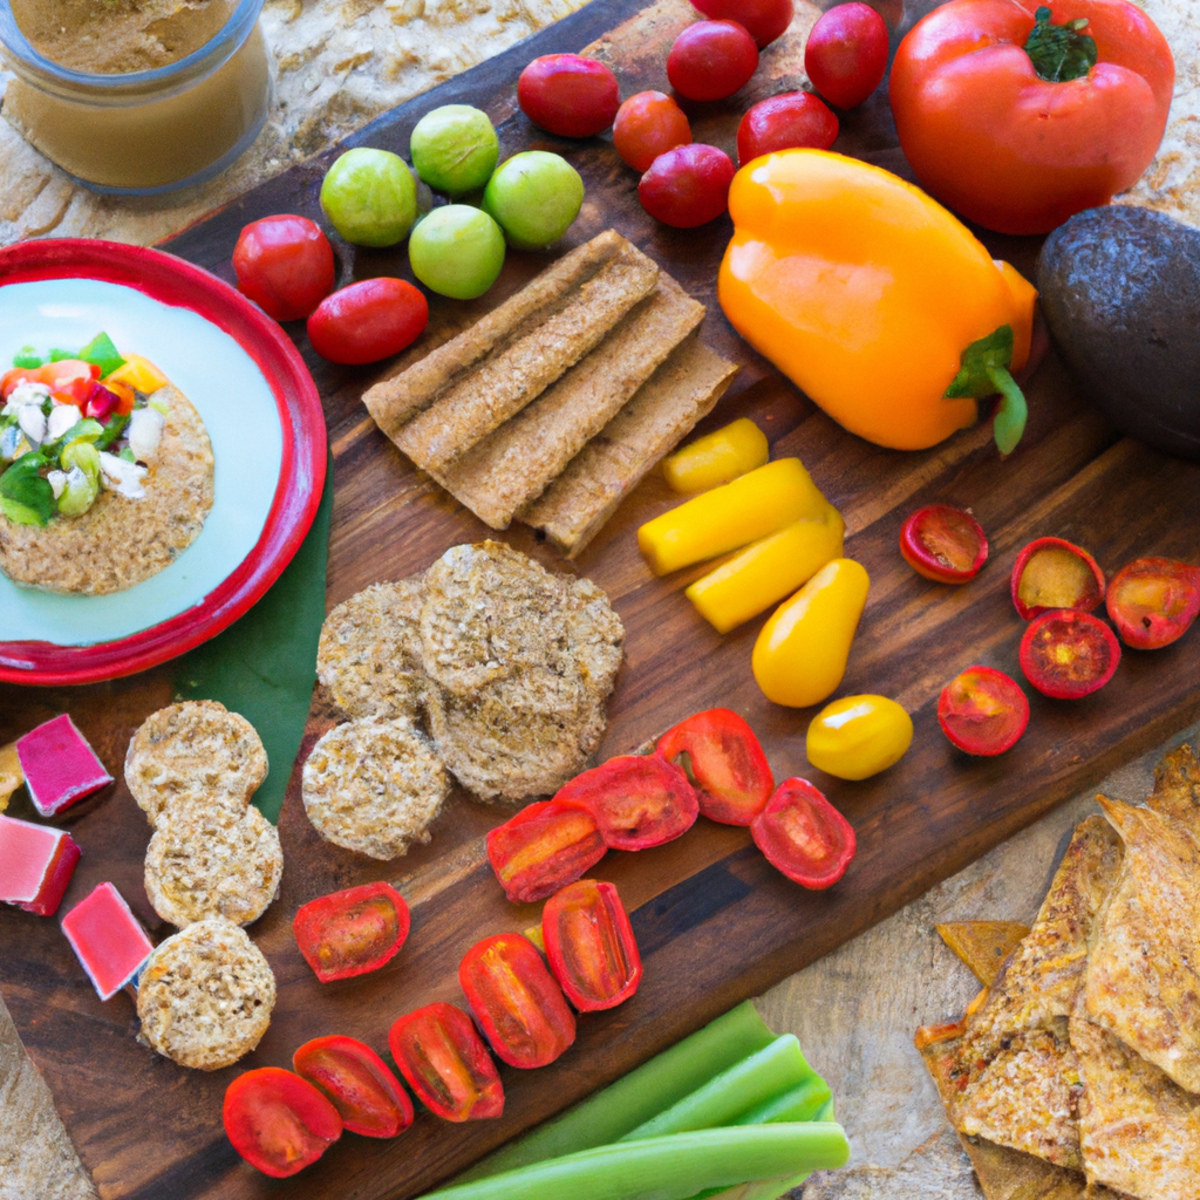 The photo features a wooden cutting board with an assortment of gluten-free foods arranged in an artful display. In the center of the board is a pile of quinoa, surrounded by colorful vegetables such as bell peppers, cherry tomatoes, and sliced avocado. A small dish of hummus sits nearby, with gluten-free crackers and rice cakes arranged around it. In the background, a glass of sparkling water with a slice of lemon adds a refreshing touch. The photo captures the essence of a balanced and healthy gluten-free diet, with a focus on fresh, whole foods.